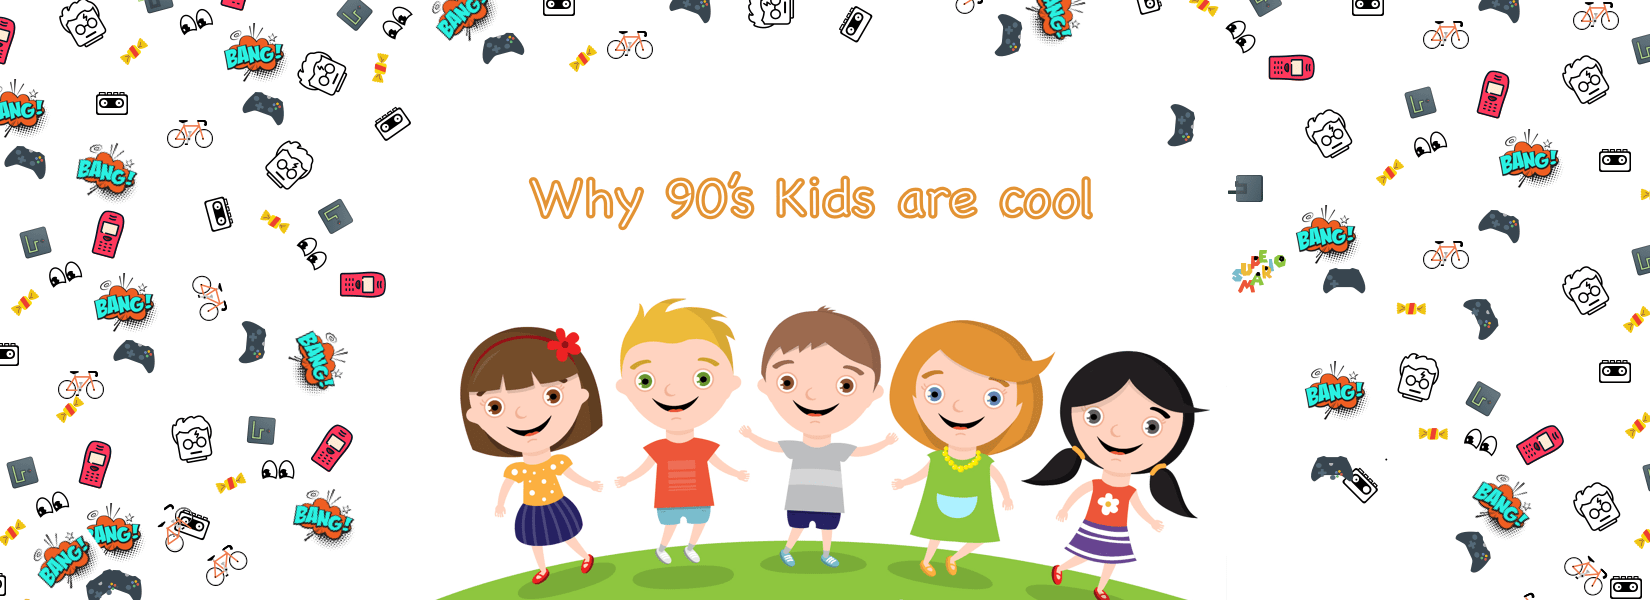 Why 90’s kids are cool